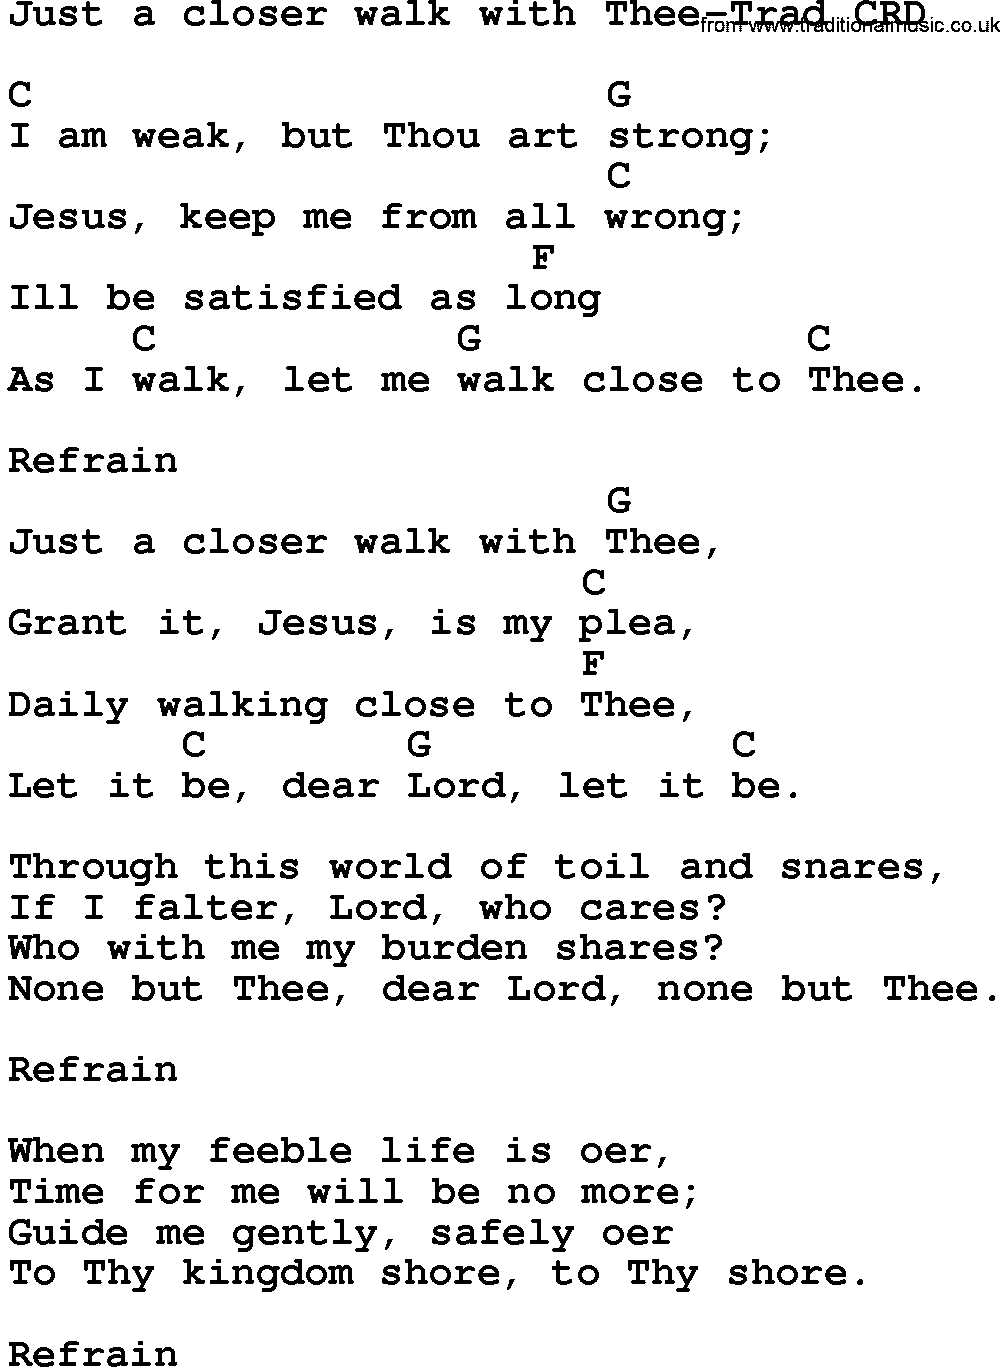 Gospel Song: Just A Closer Walk With Thee-Trad, lyrics and chords.